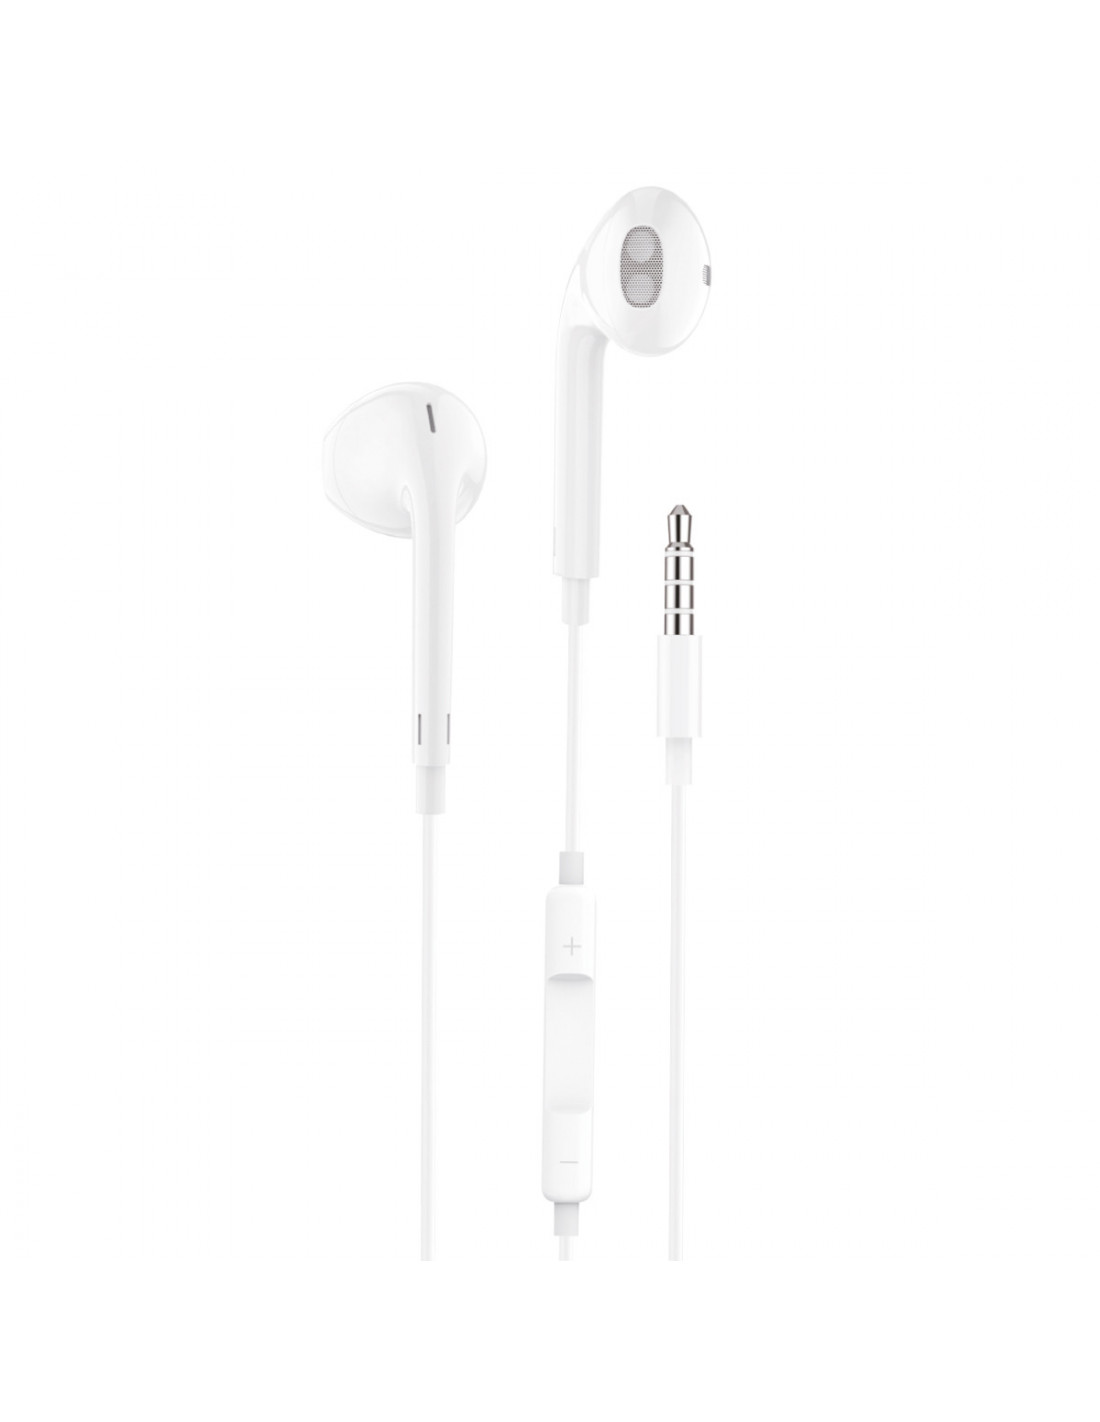 https://www.pcsarl.com/1035279-thickbox_default/ecouteurs-micro-intra-auriculaire-filaire-blanc.jpg